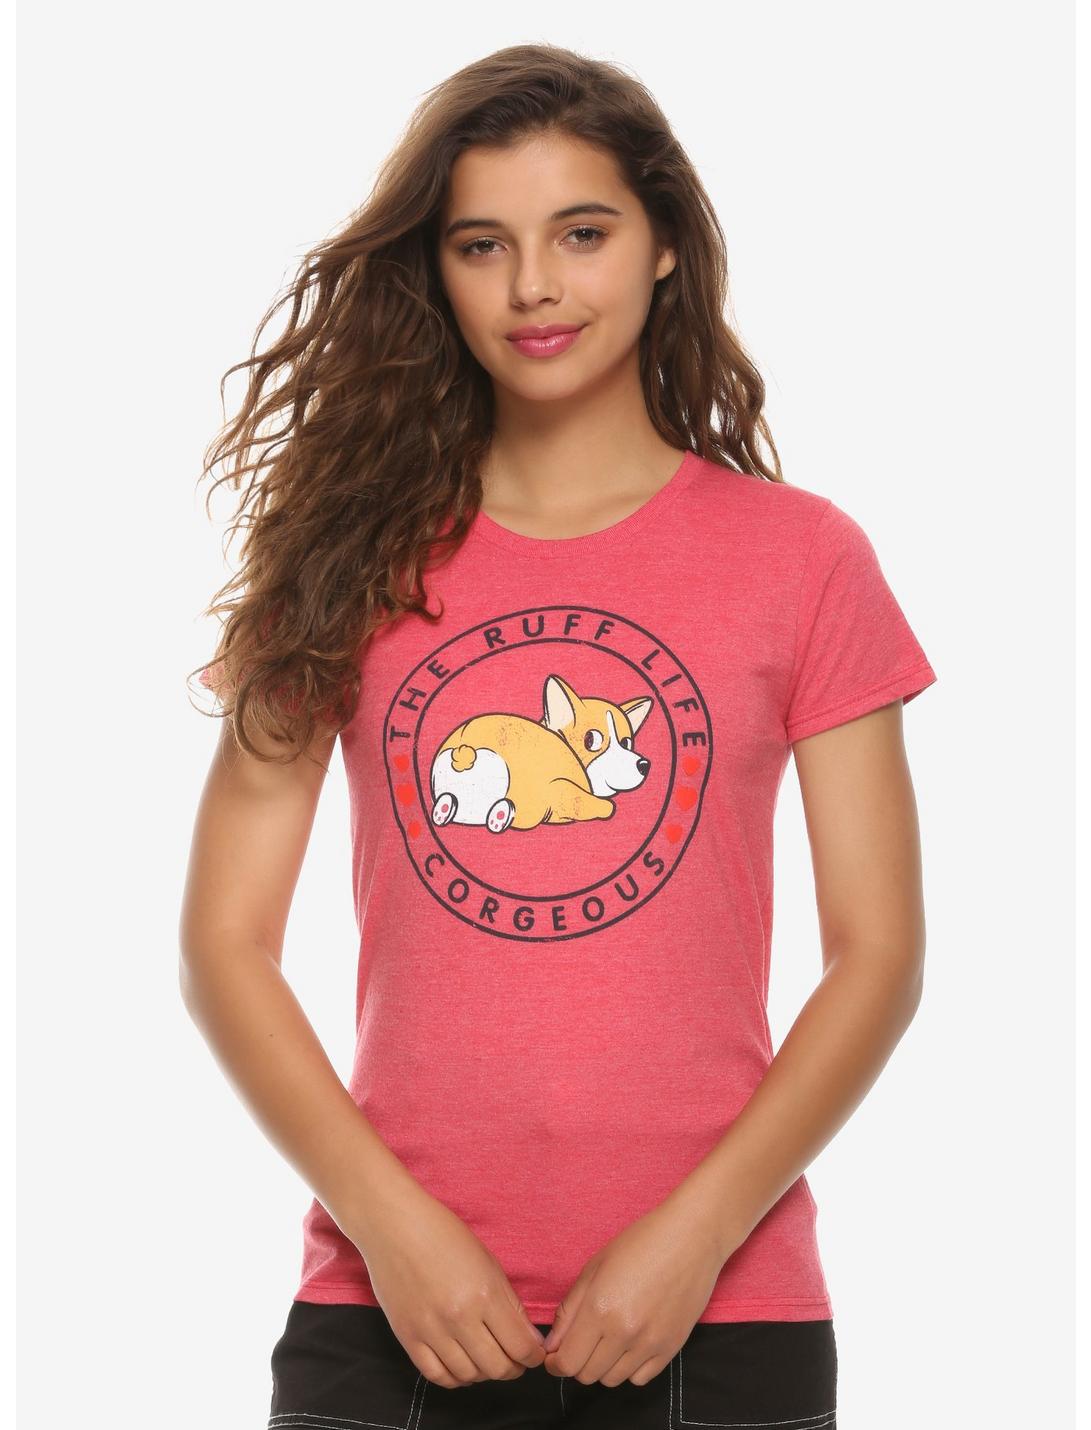 The Ruff Life Corgeous Girls T-Shirt, RED, hi-res